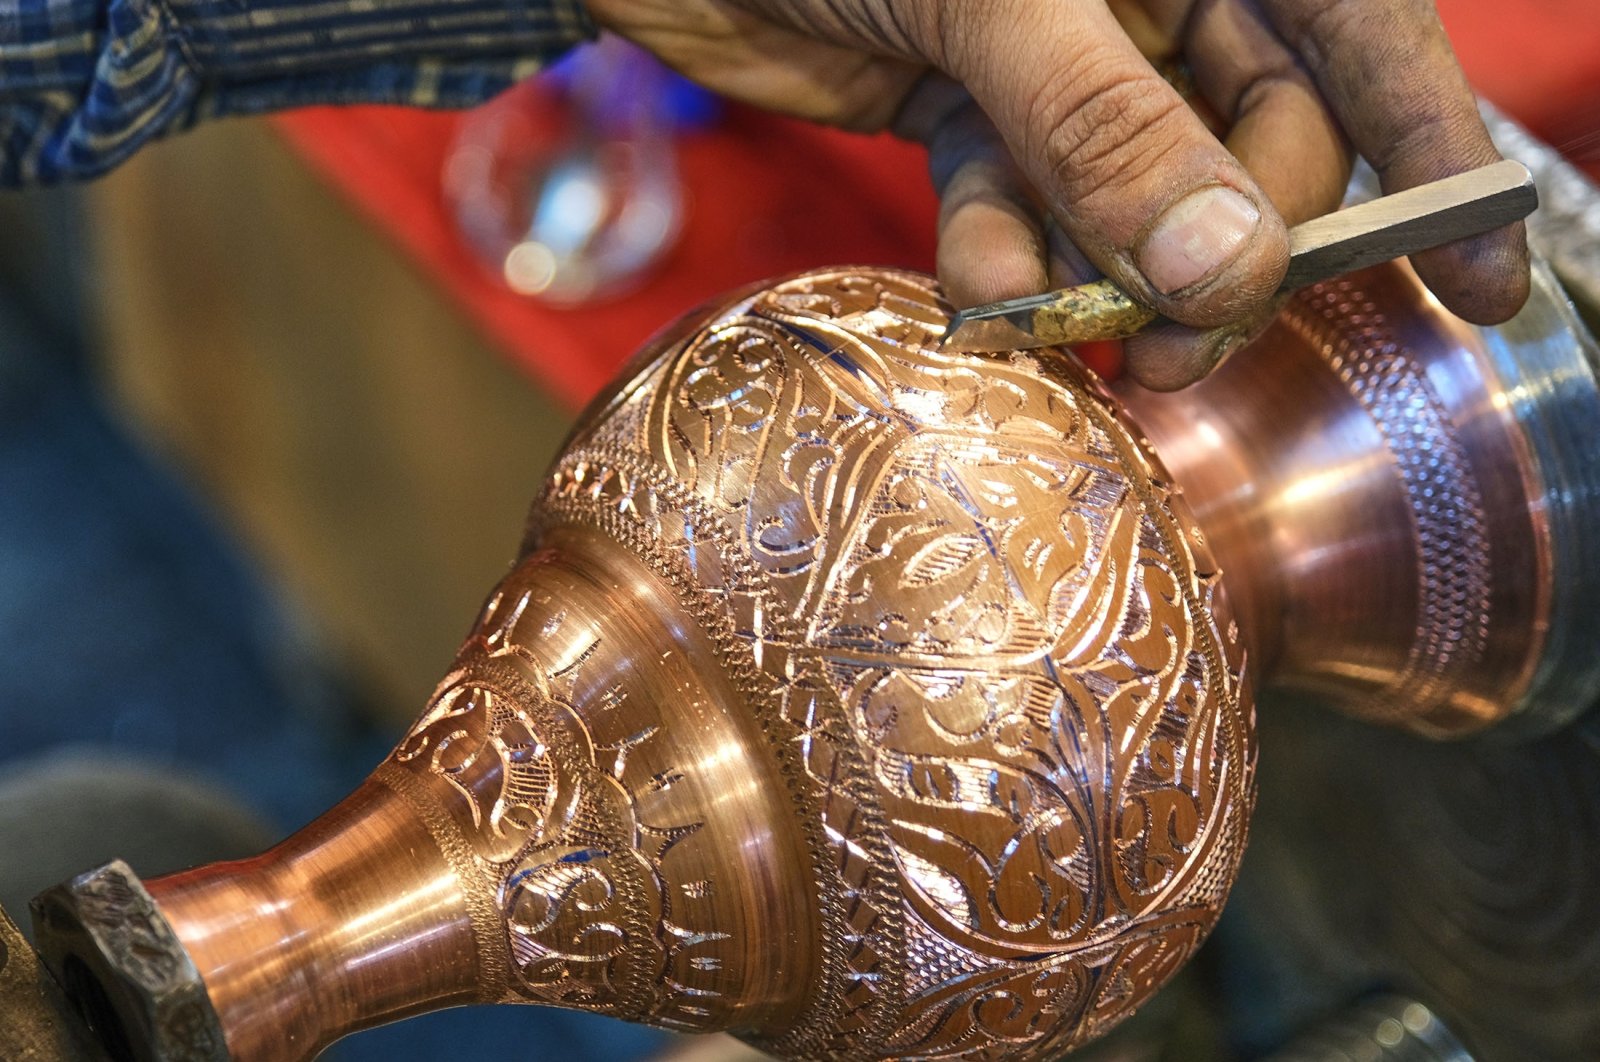 A coppersmith works on engraving a handcrafted item. (Shutterstock Photo)